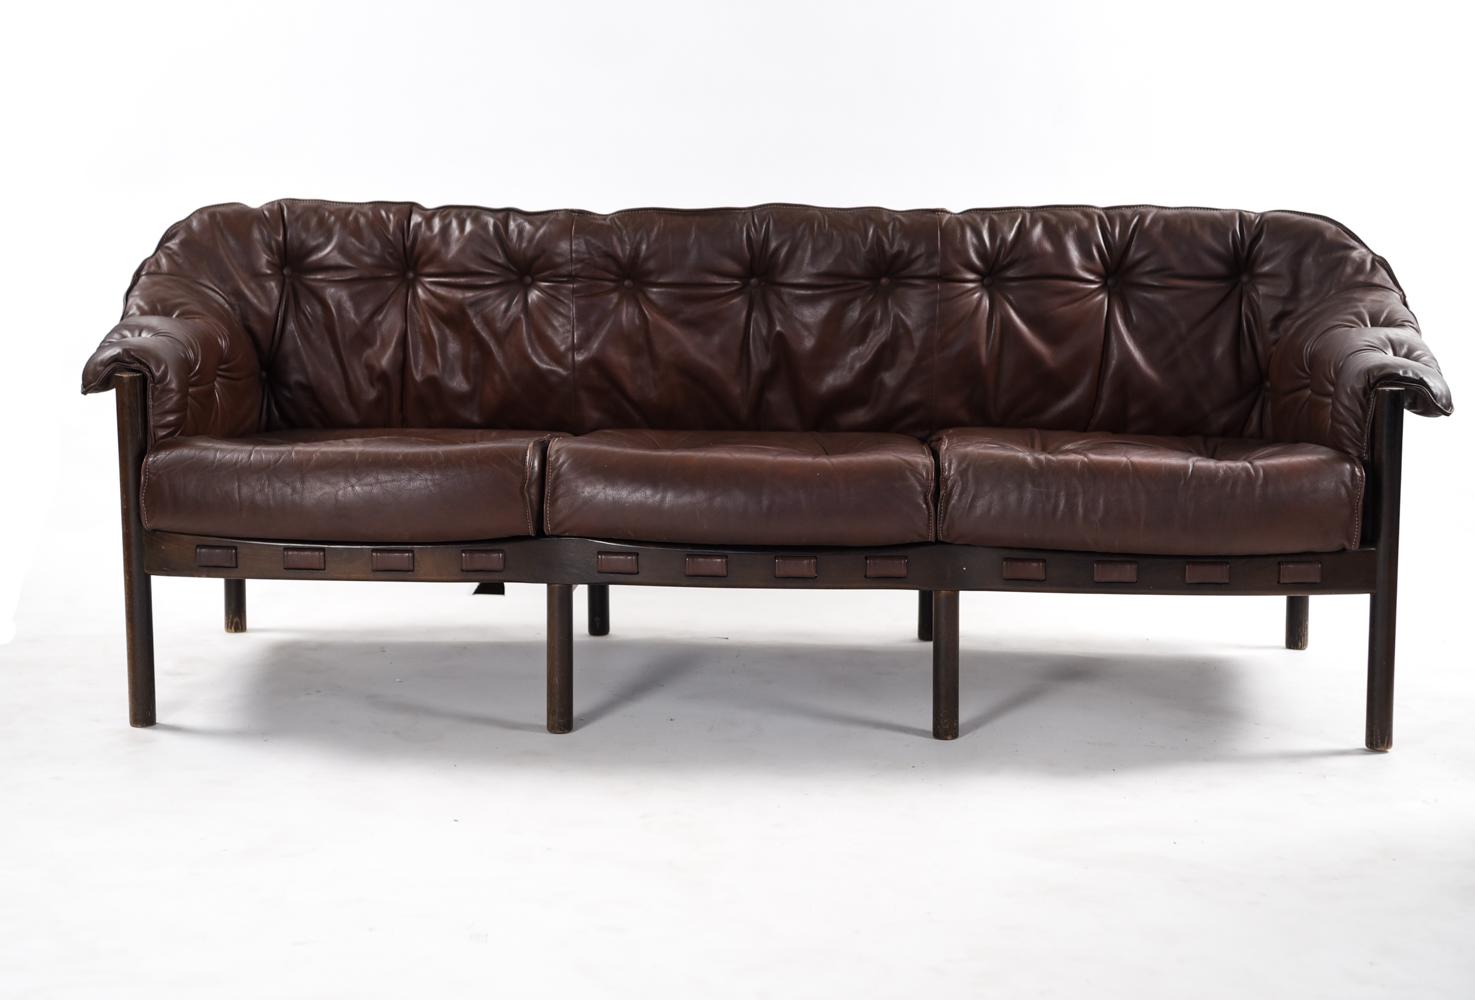 This midcentury three-seat sofa was designed by Arne Norrell for Coja, 1960s. Upholstered in a button tufted brown leather, displaying an attractive vintage patina. A well known, respected design in Scandinavian Modern furniture.